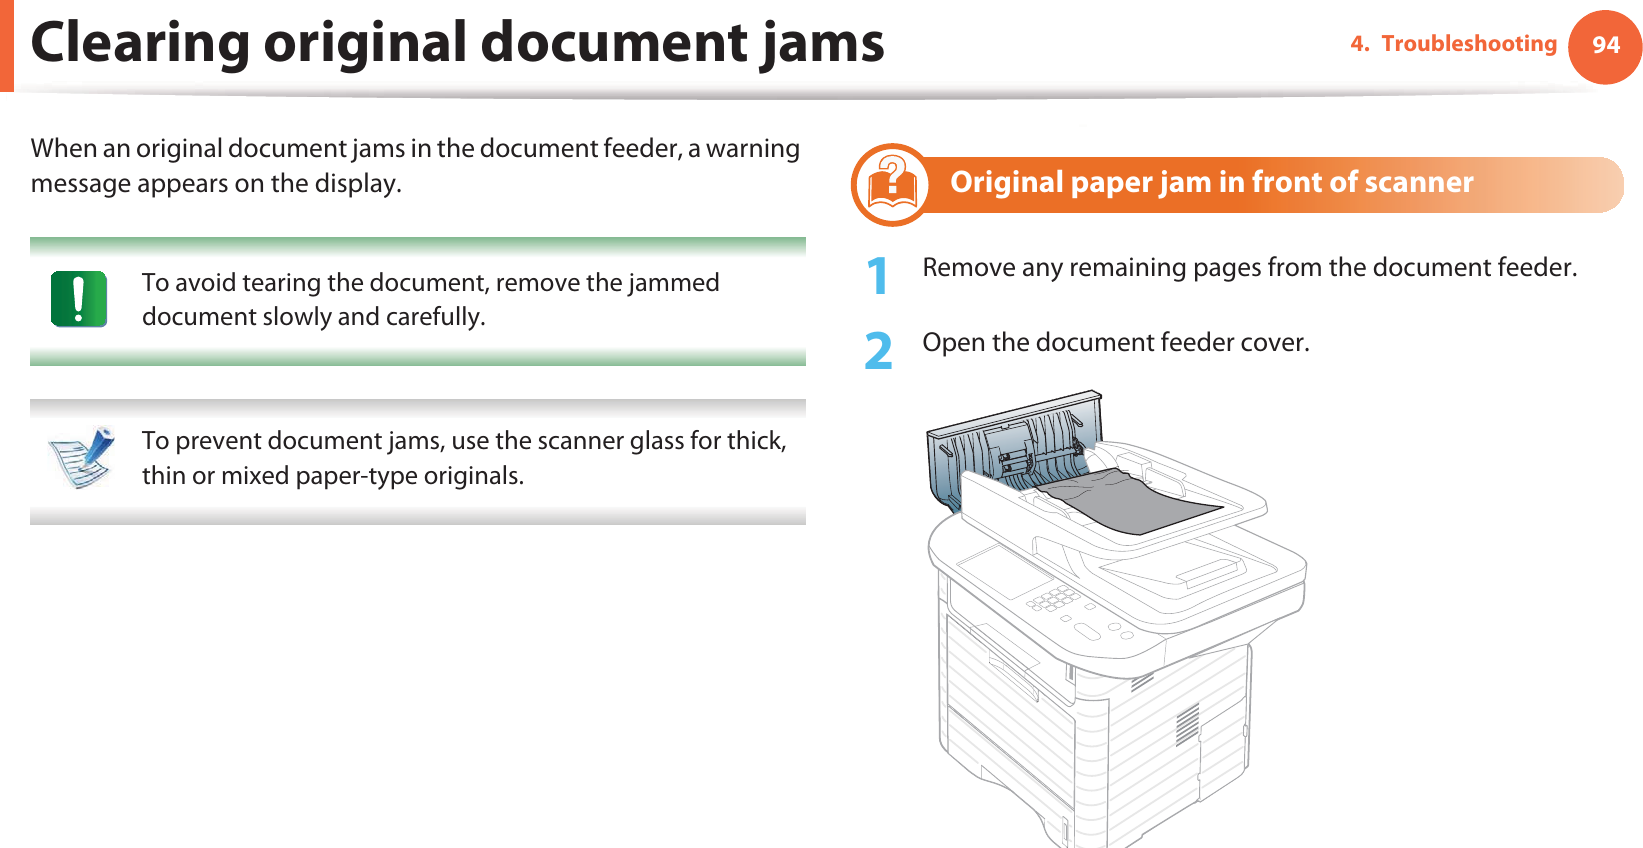 944. TroubleshootingClearing original document jamsWhen an original document jams in the document feeder, a warning message appears on the display. To avoid tearing the document, remove the jammed document slowly and carefully.  To prevent document jams, use the scanner glass for thick, thin or mixed paper-type originals. 1 Original paper jam in front of scanner1Remove any remaining pages from the document feeder.2  Open the document feeder cover.